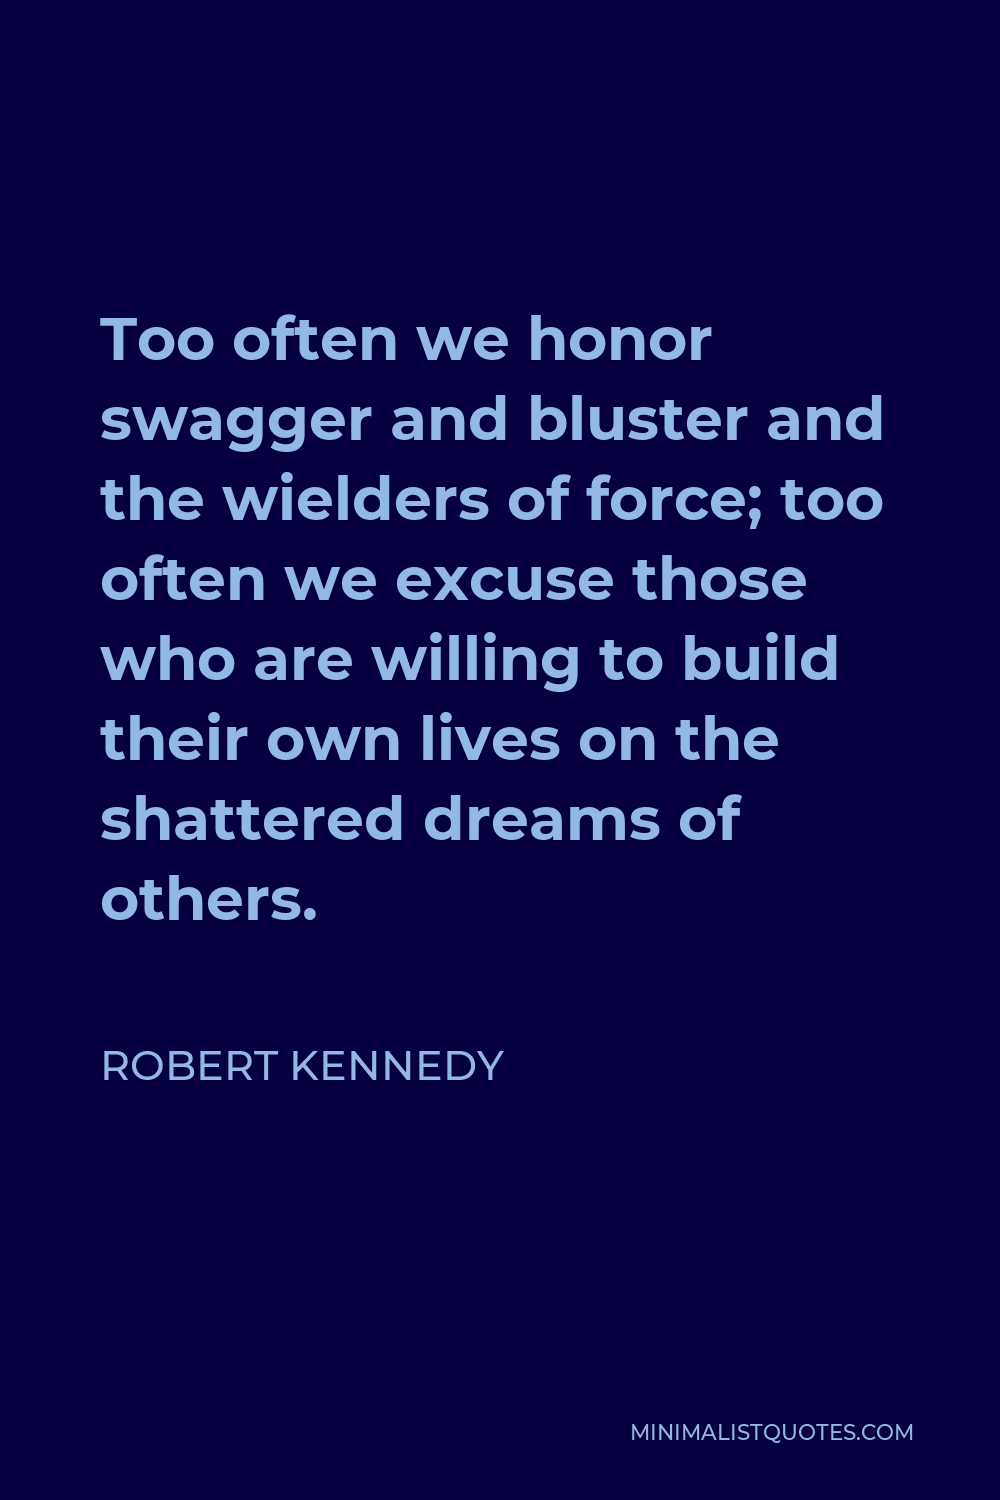 Robert Kennedy Quote - Too often we honor swagger and bluster and the wielders of force; too often we excuse those who are willing to build their own lives on the shattered dreams of others.